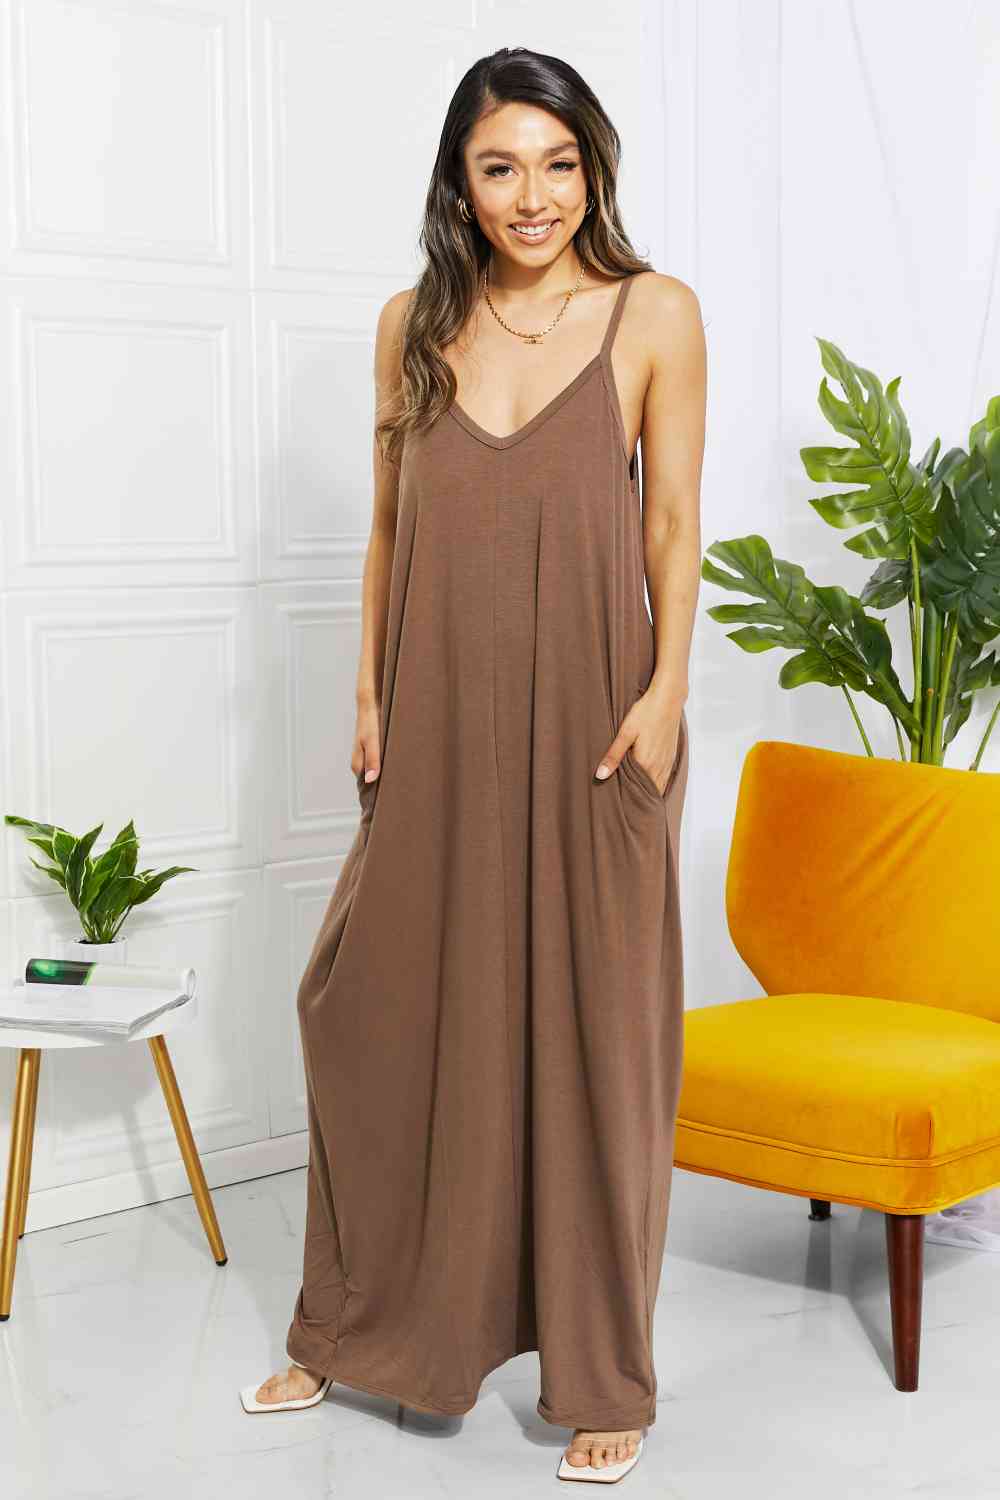 Experience beachy vibes with our Women's Casual Zenana Beach Vibes Cami Maxi Dress. Featuring a middle seam, adjustable straps, and soft stretchy fabric, this summertime essential is available in various colors. Wear it alone, pair it with a bralette or cardigan, or use it as a stylish cover-up. Don't forget, it comes with convenient pockets!